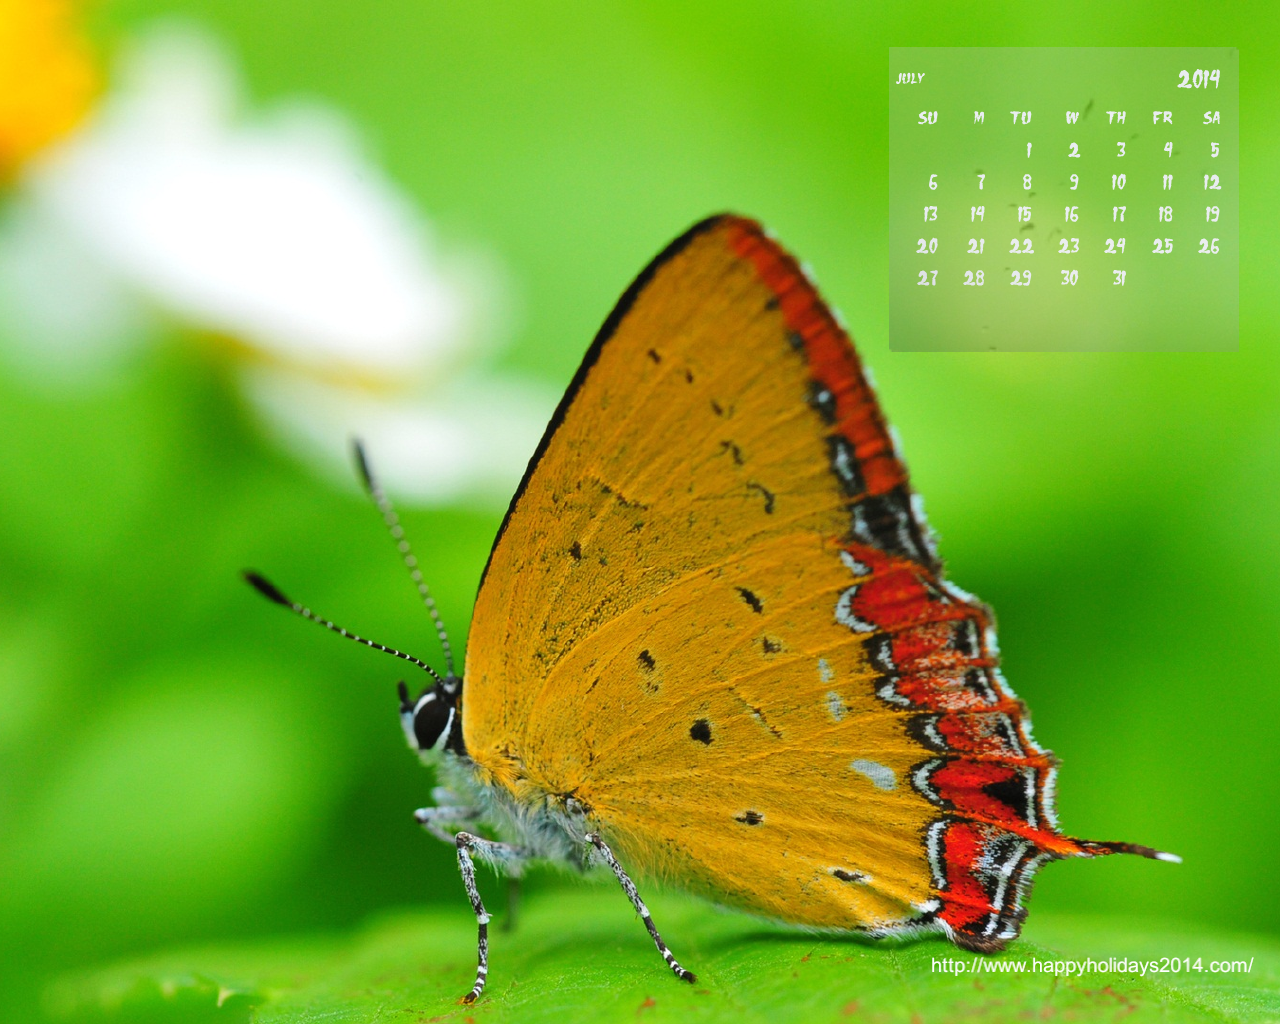 July 2014 Calendar Wallpapers Happy Holidays 2014 1280x1024